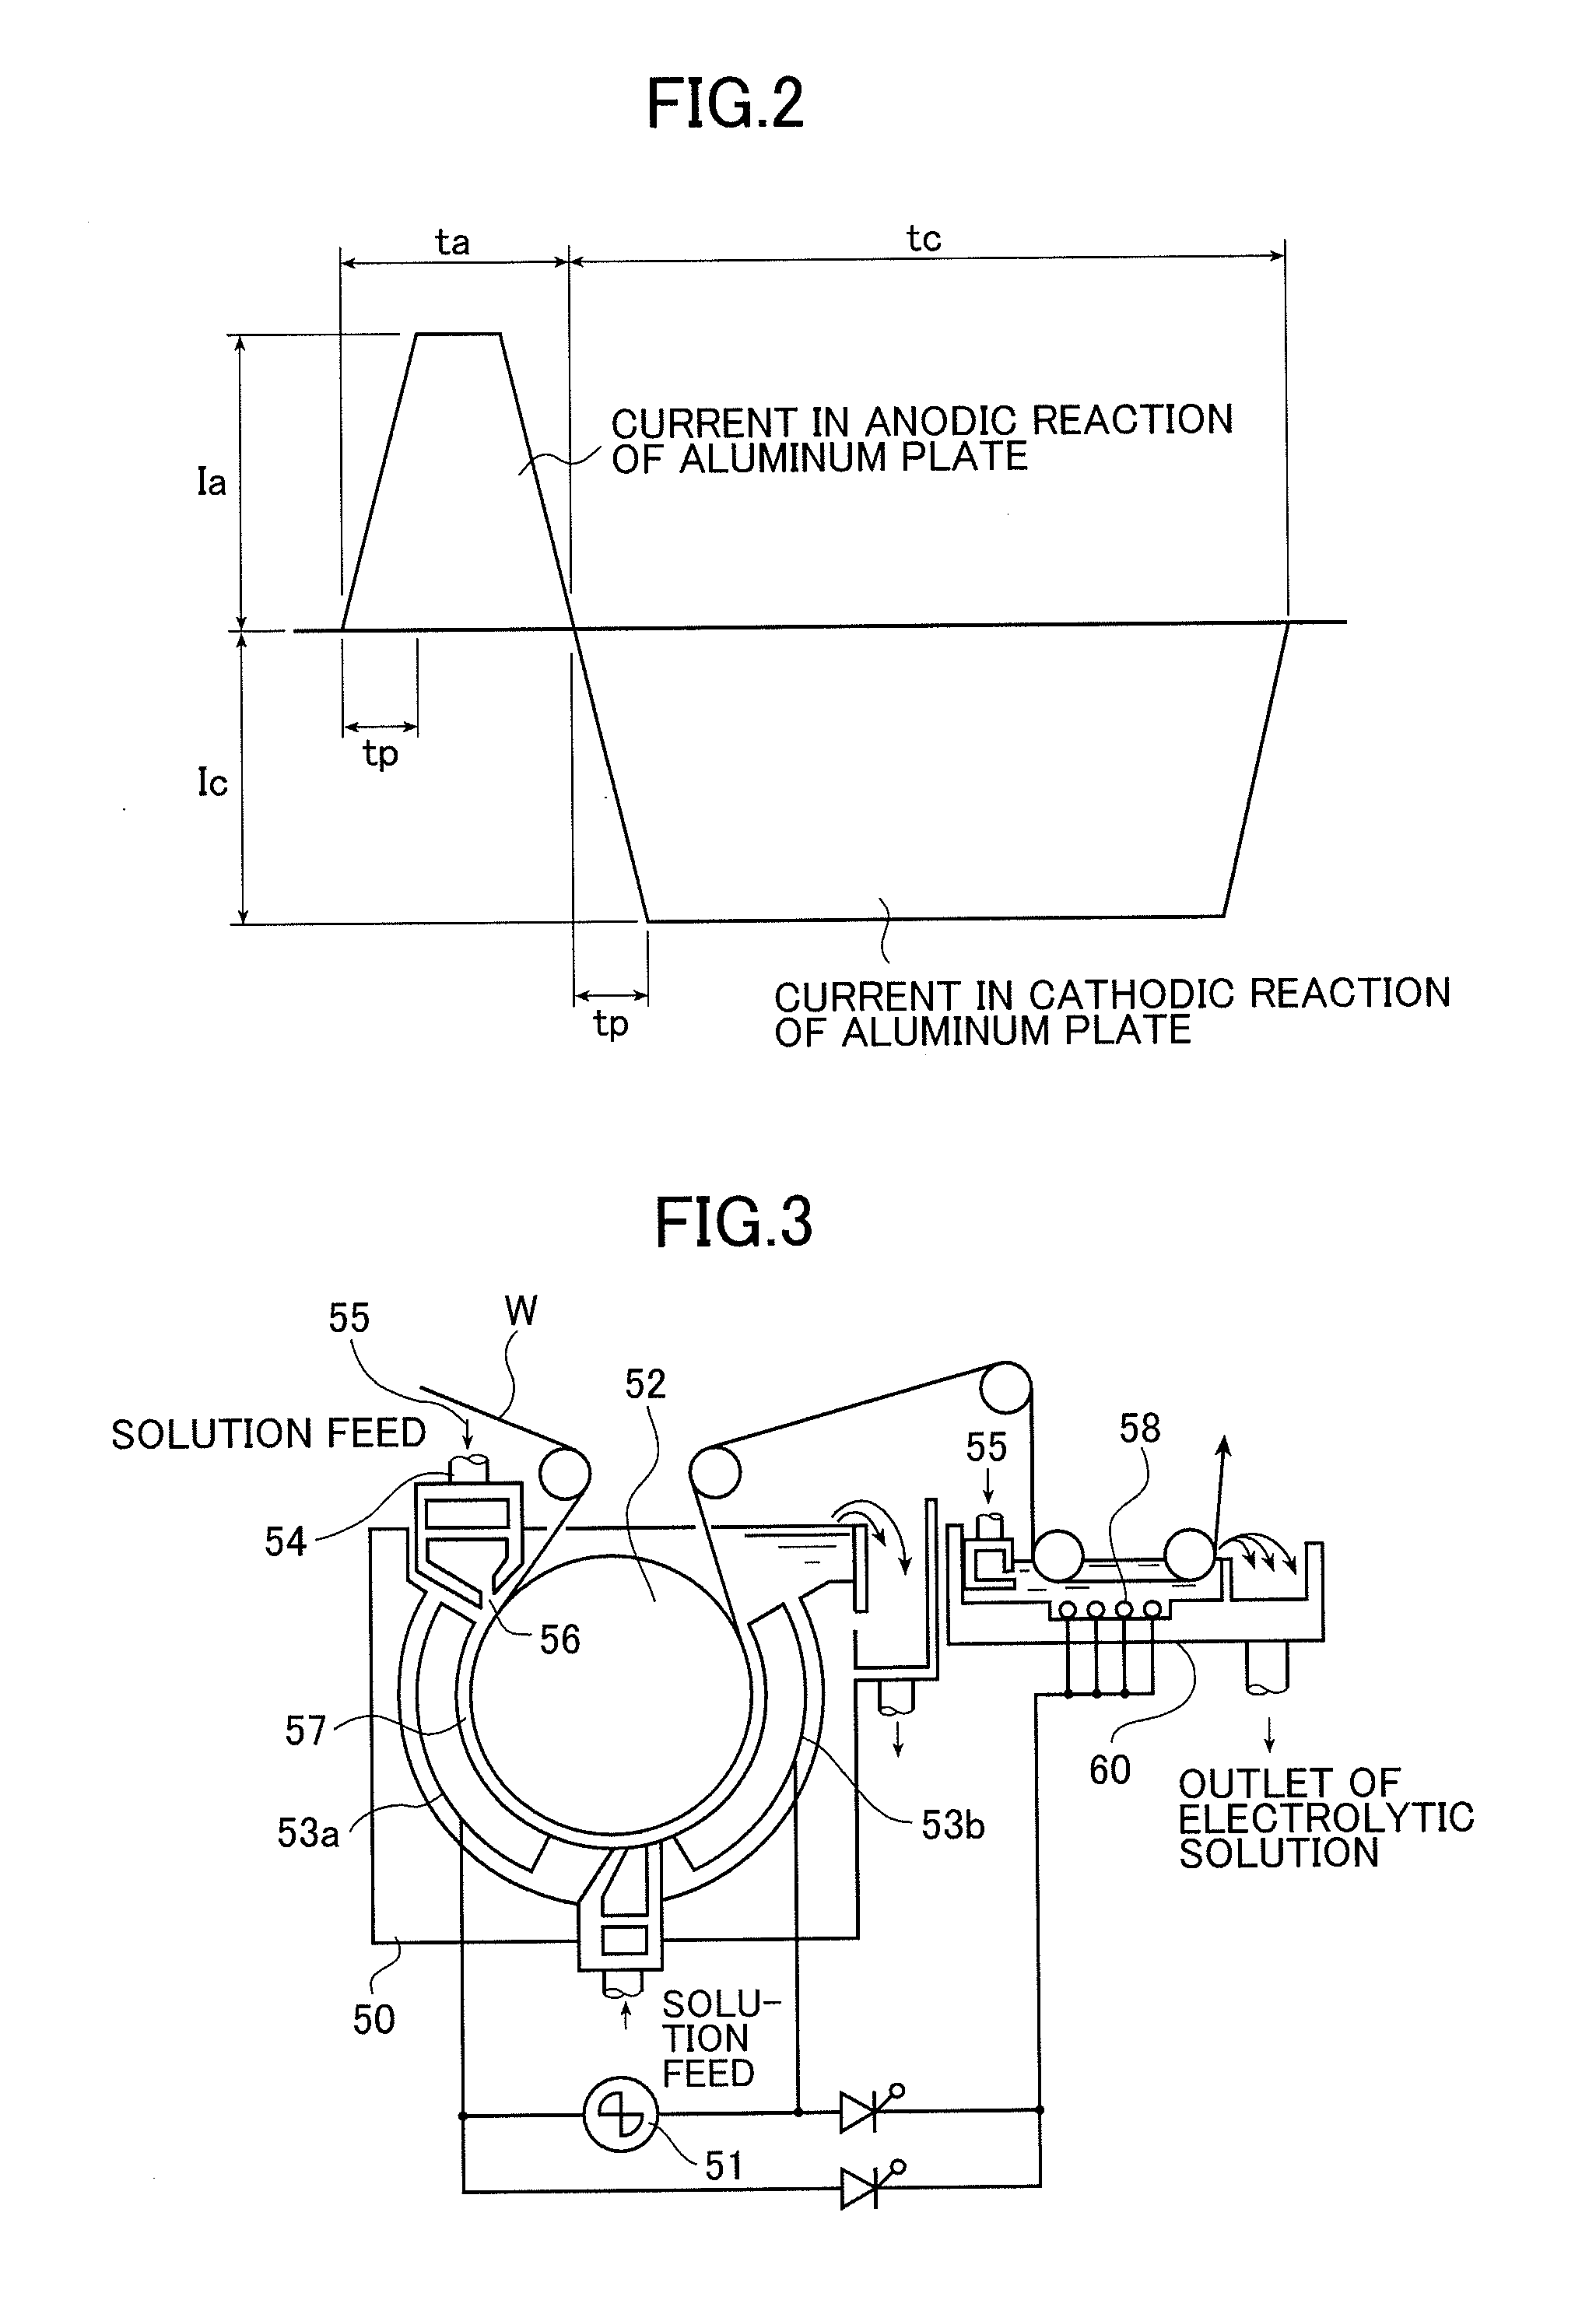 Lithographic printing plate support and presensitized plate